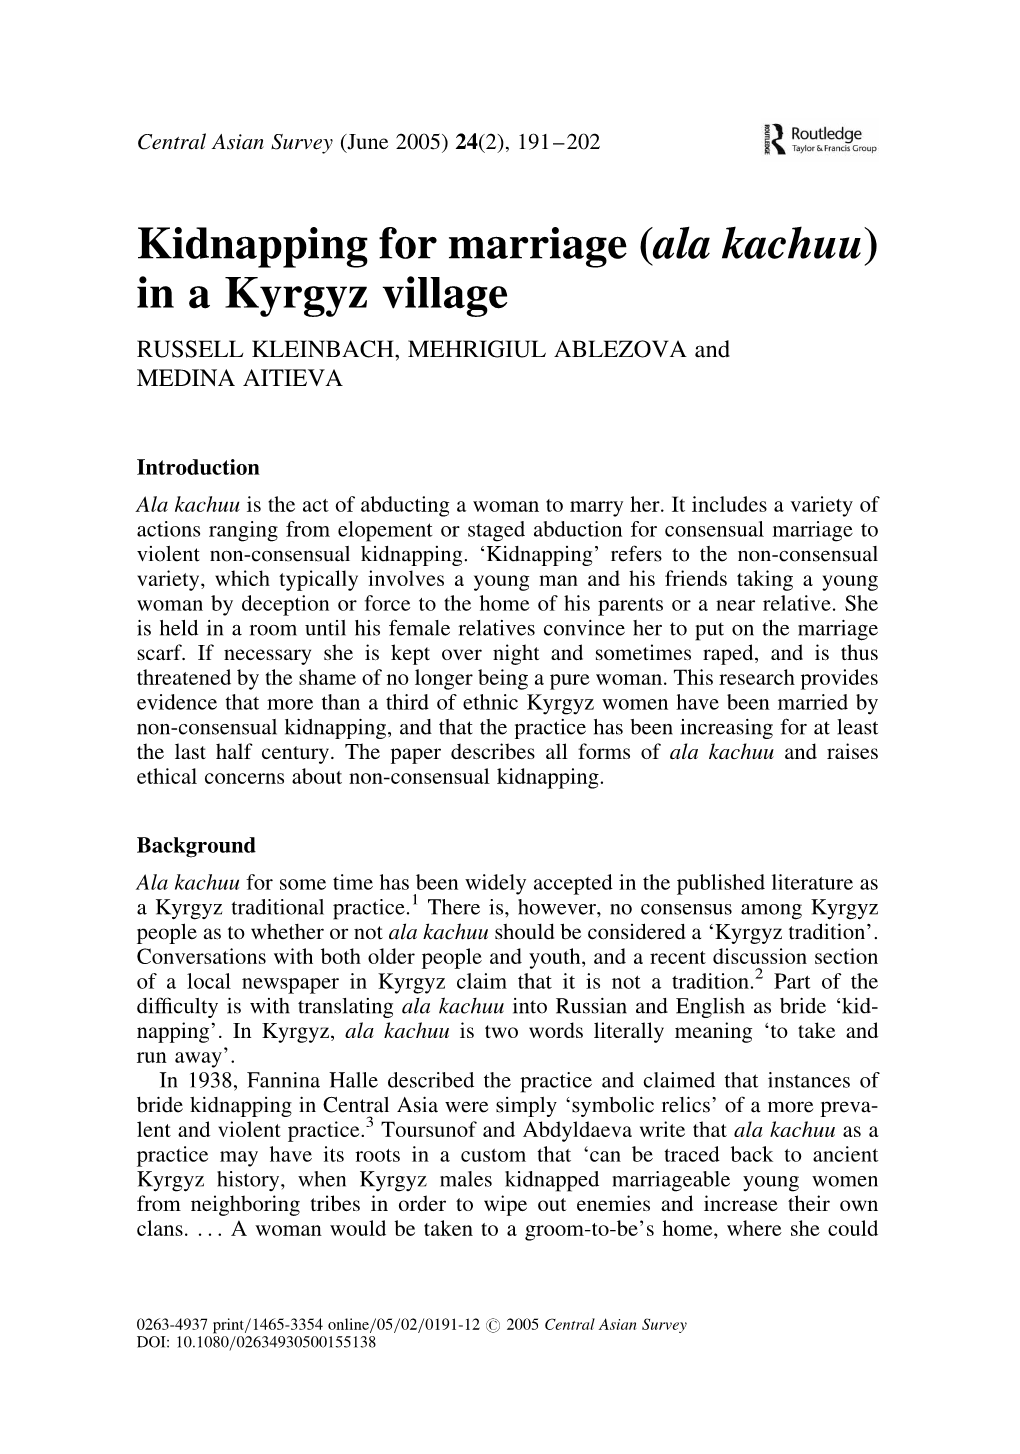 Kidnapping for Marriage (Ala Kachuu) in a Kyrgyz Village RUSSELL KLEINBACH, MEHRIGIUL ABLEZOVA and MEDINA AITIEVA